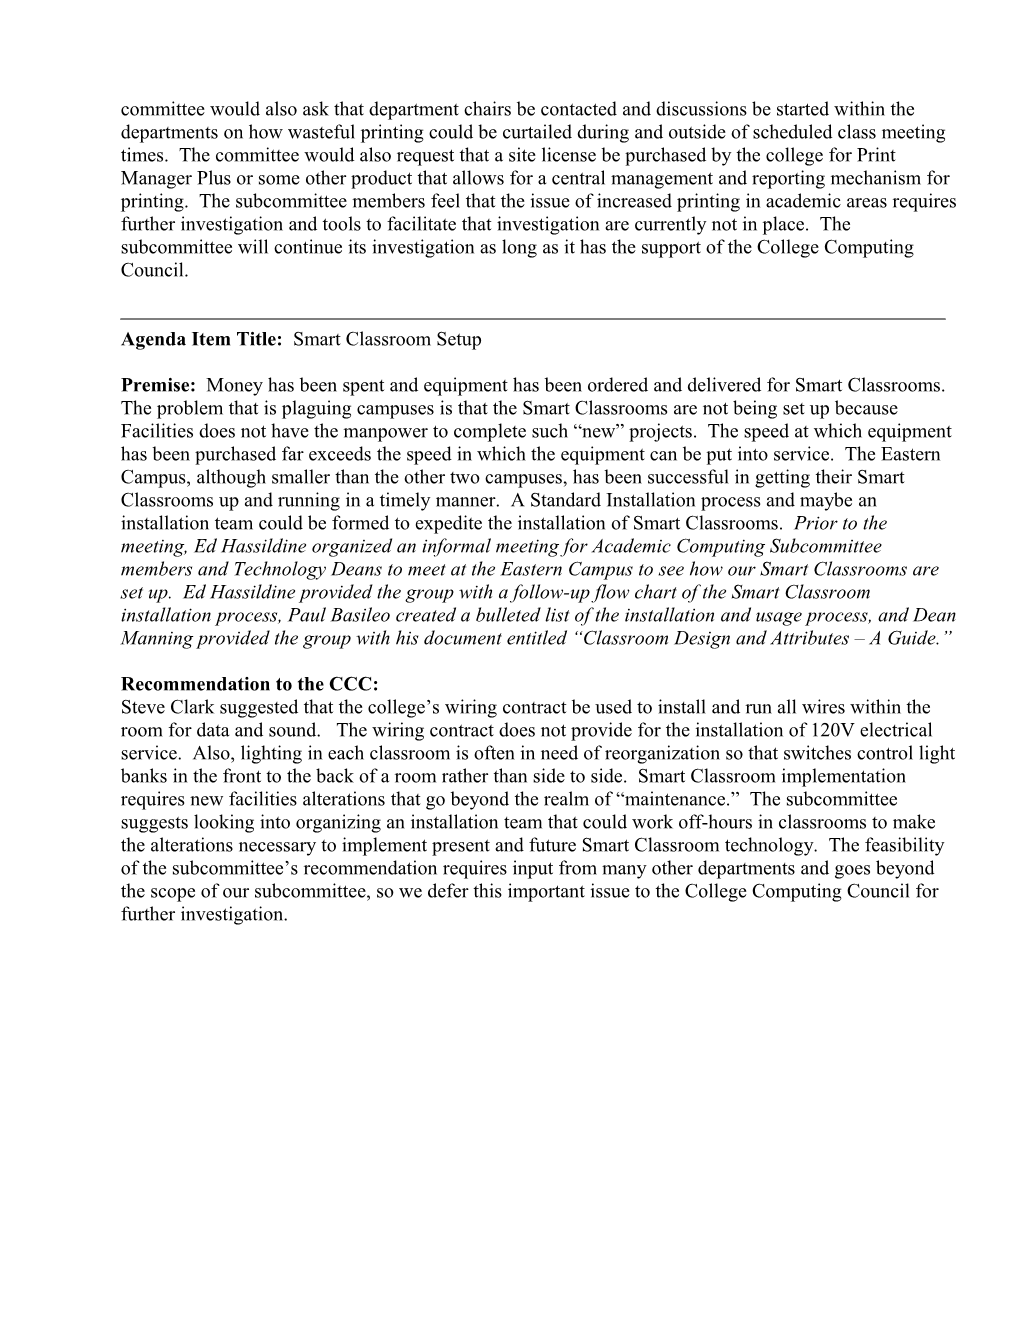 Academic Computing Subcommittee Agenda Item and Discussion Format